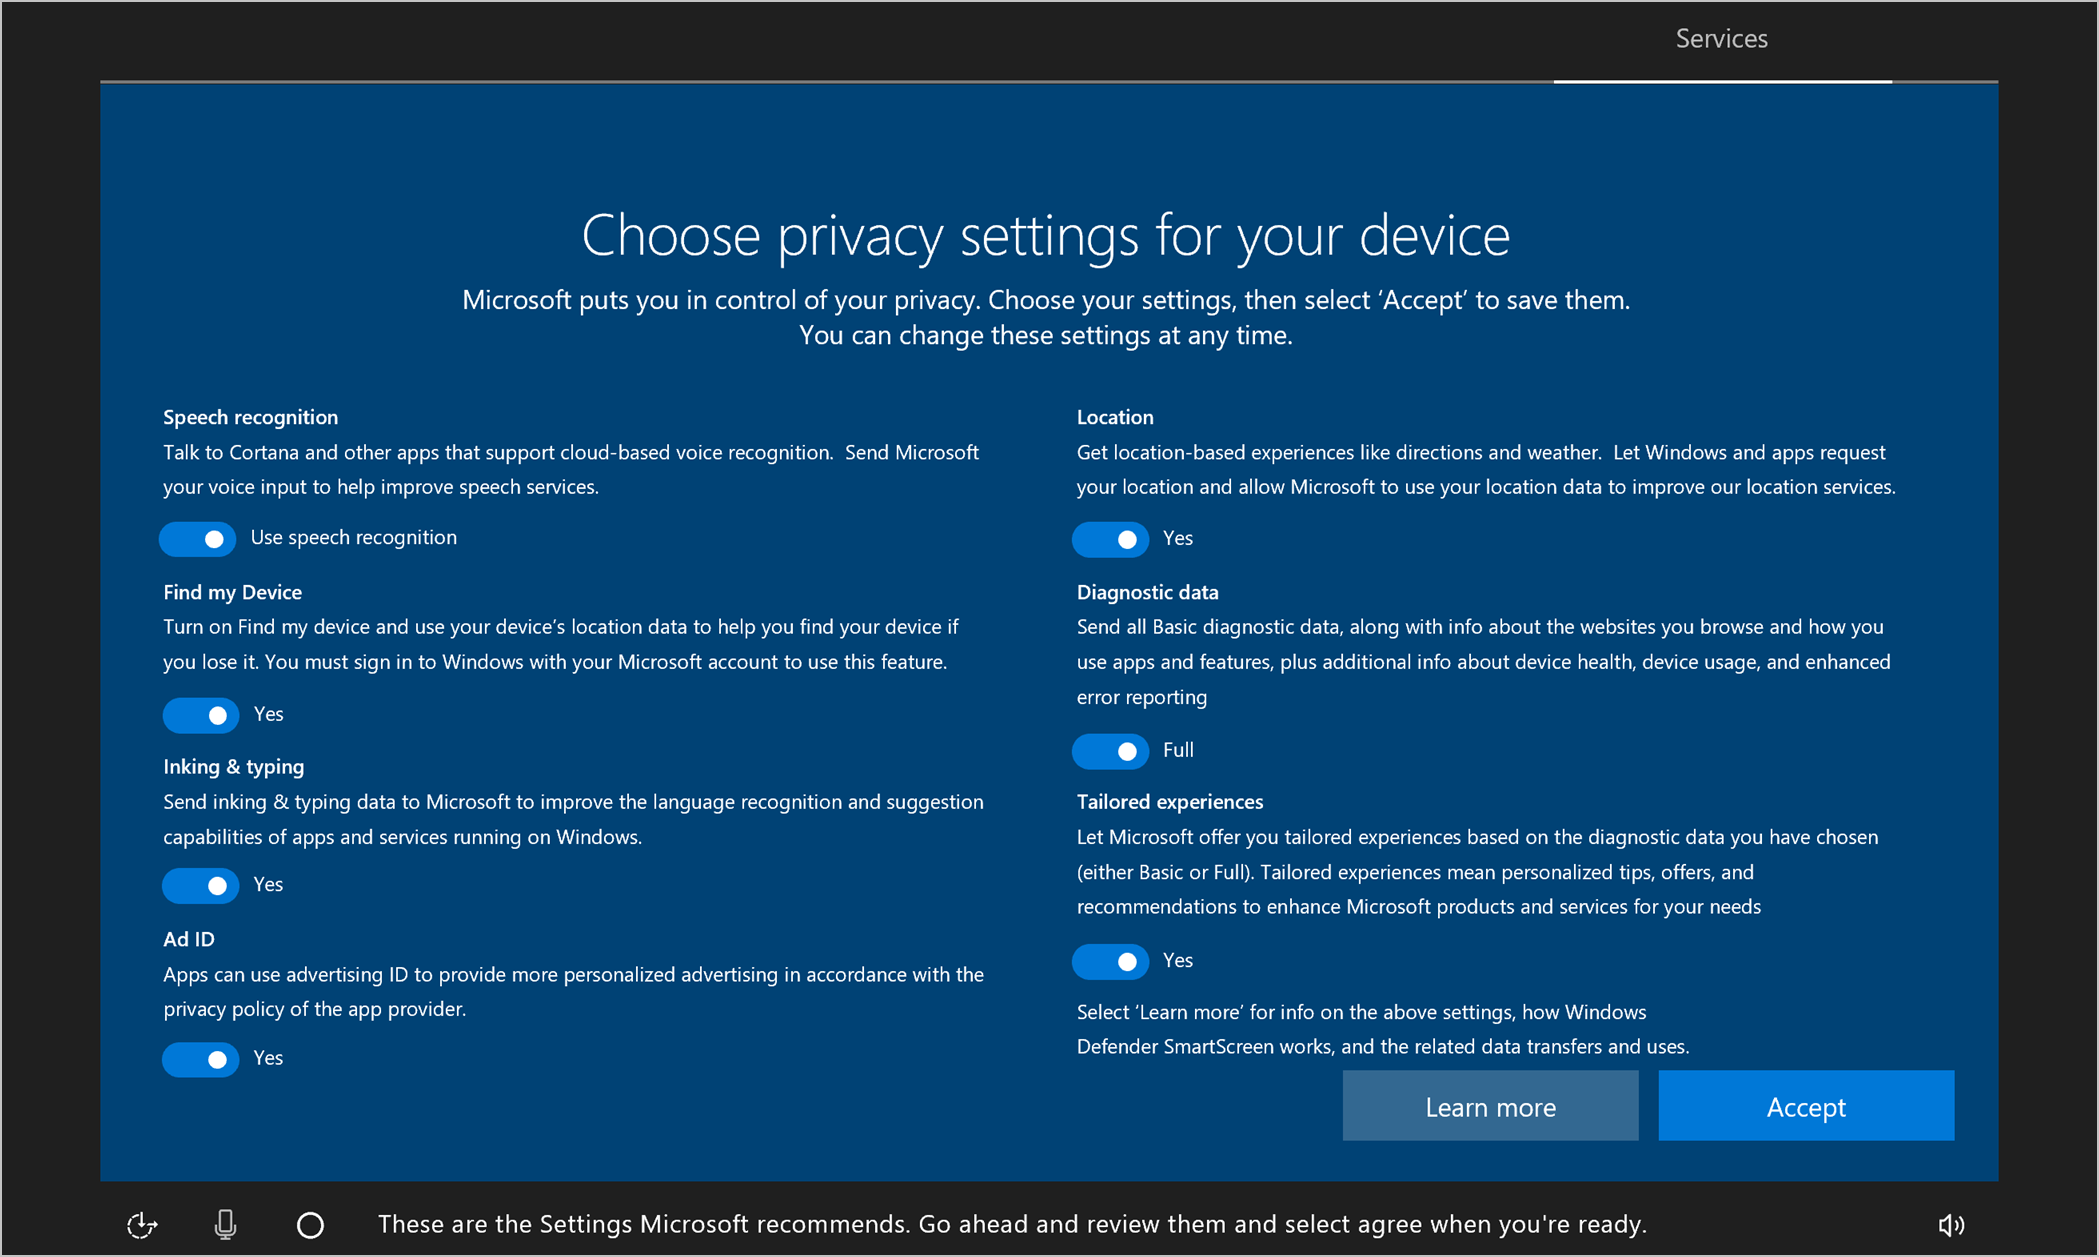 Example screenshot listing the privacy setting options, with some settings turned on by default.